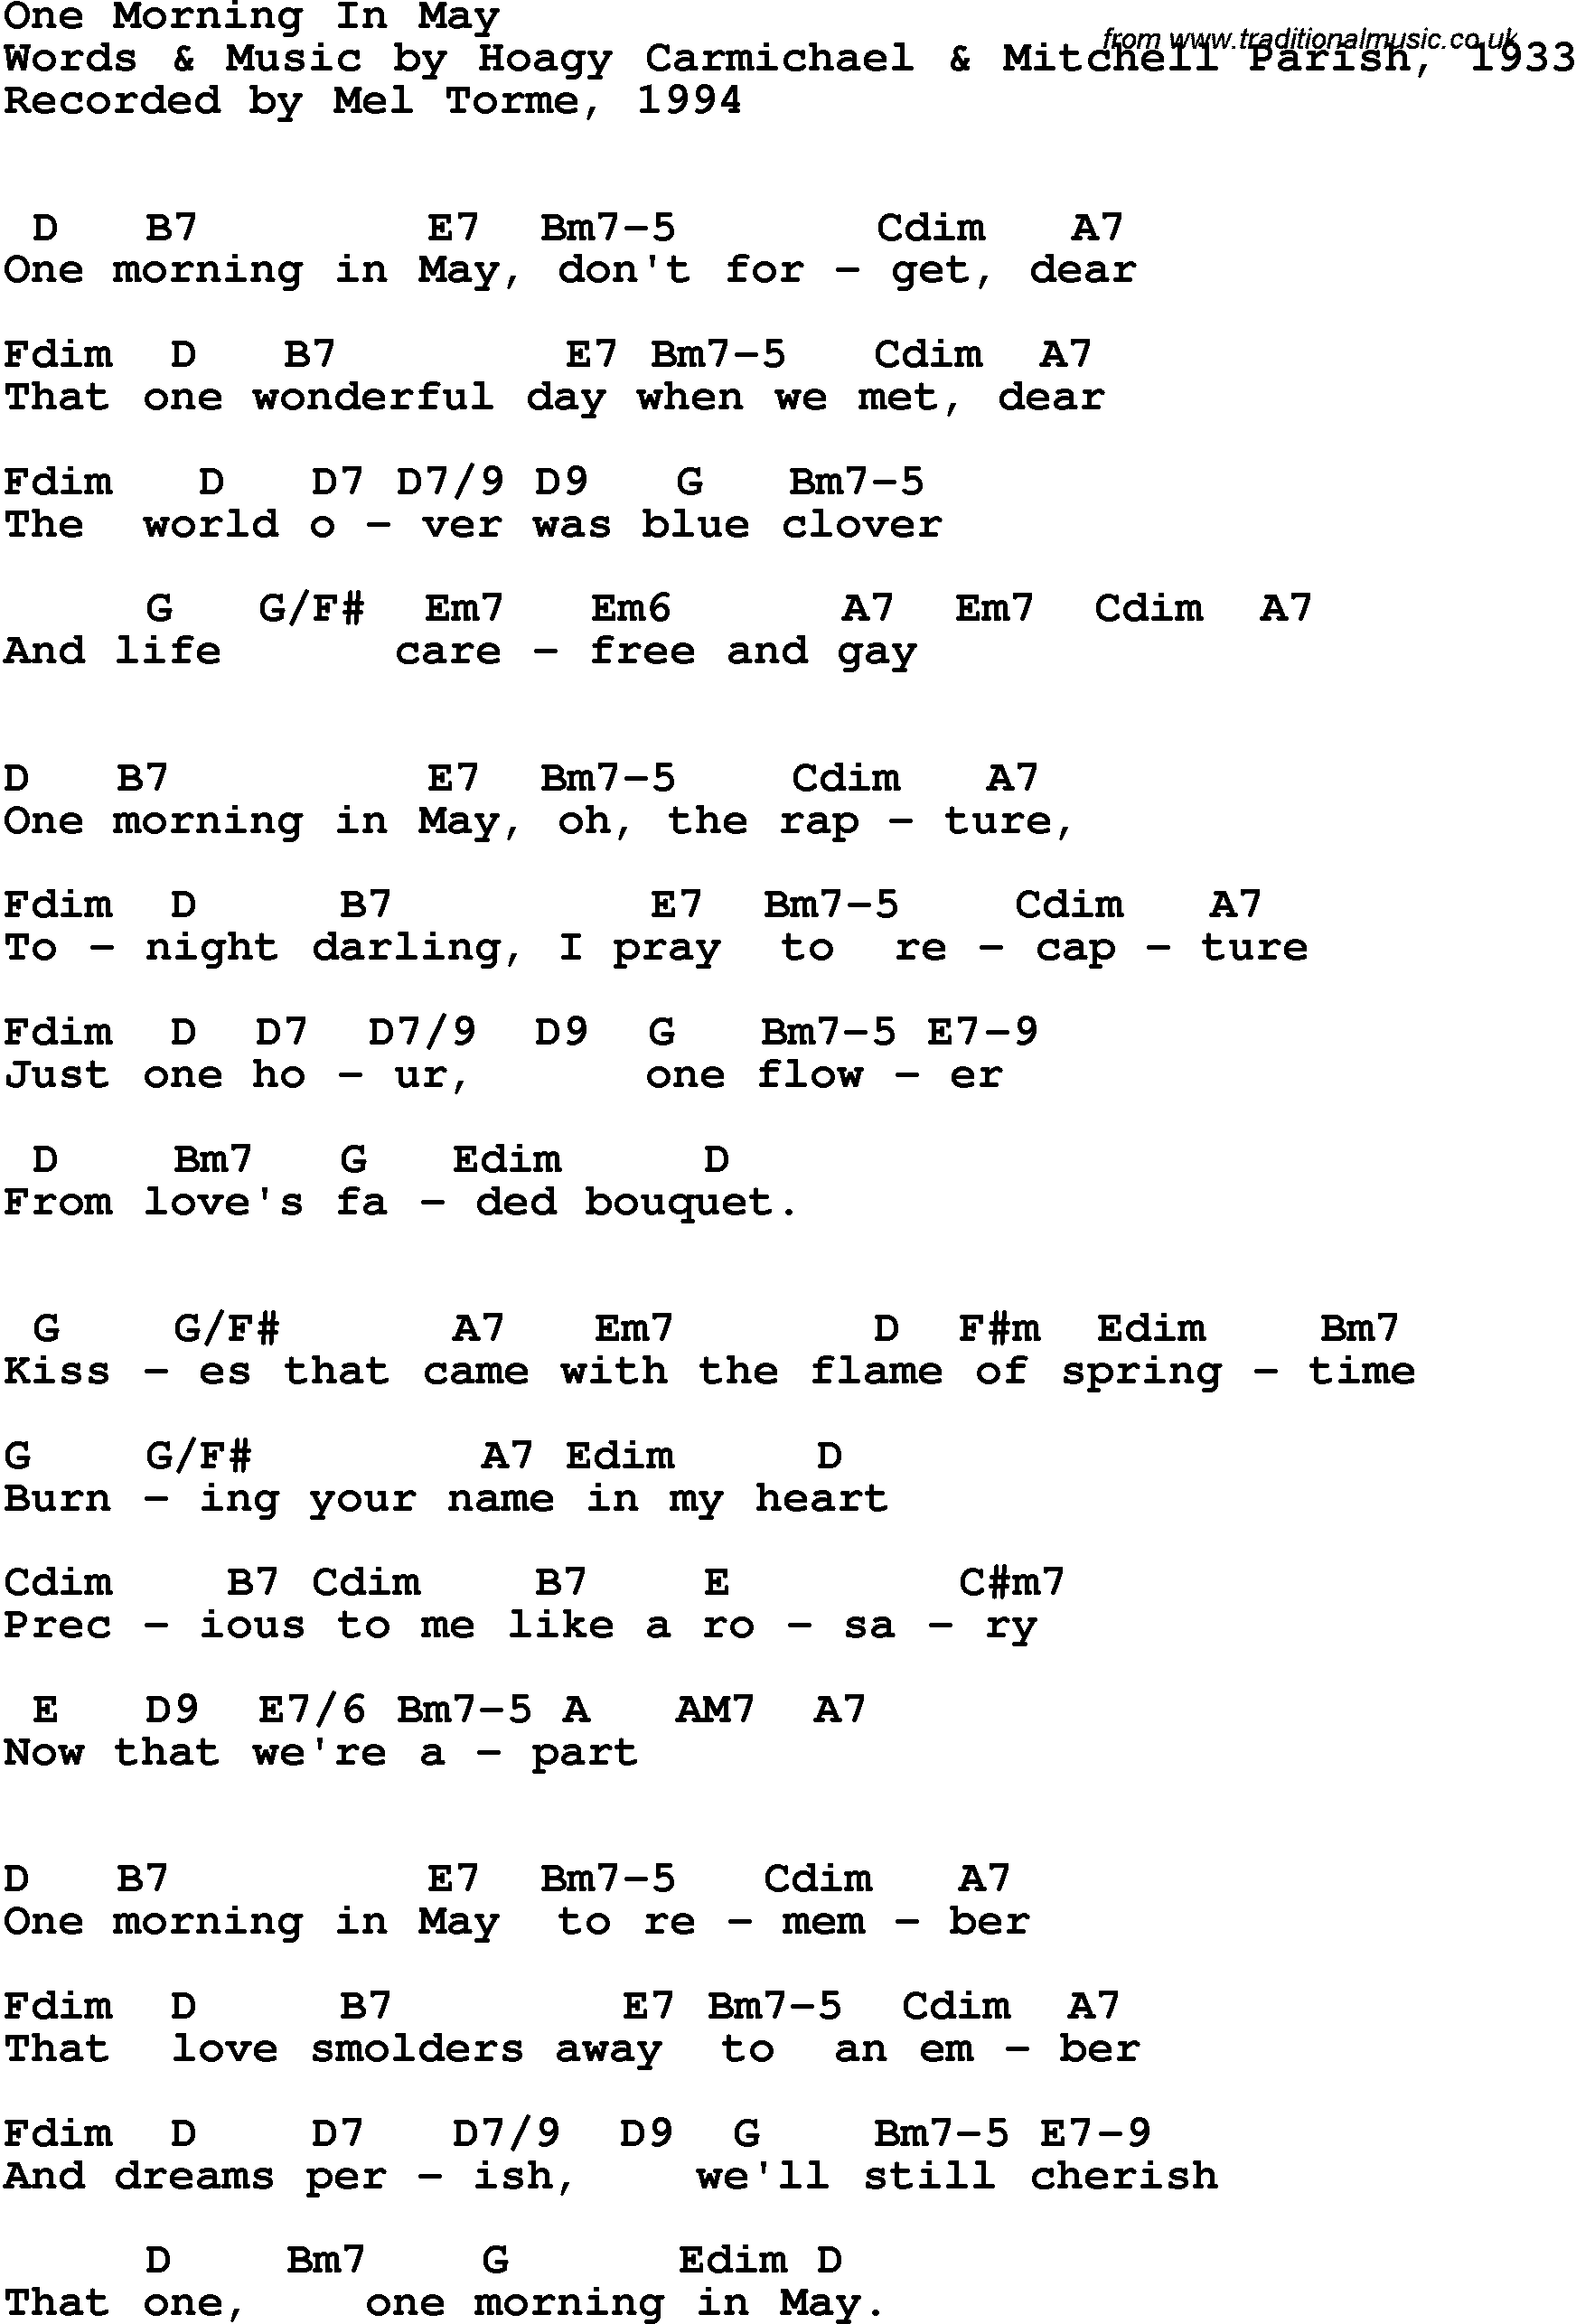 Song Lyrics with guitar chords for One Morning In May - Mel Torme, 1994